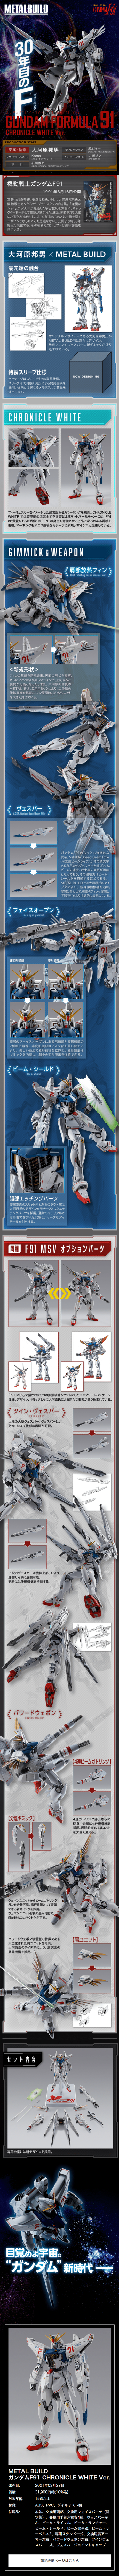 METAL BUILD ガンダムF91 CHRONICLE WHITE Ver_sp_1